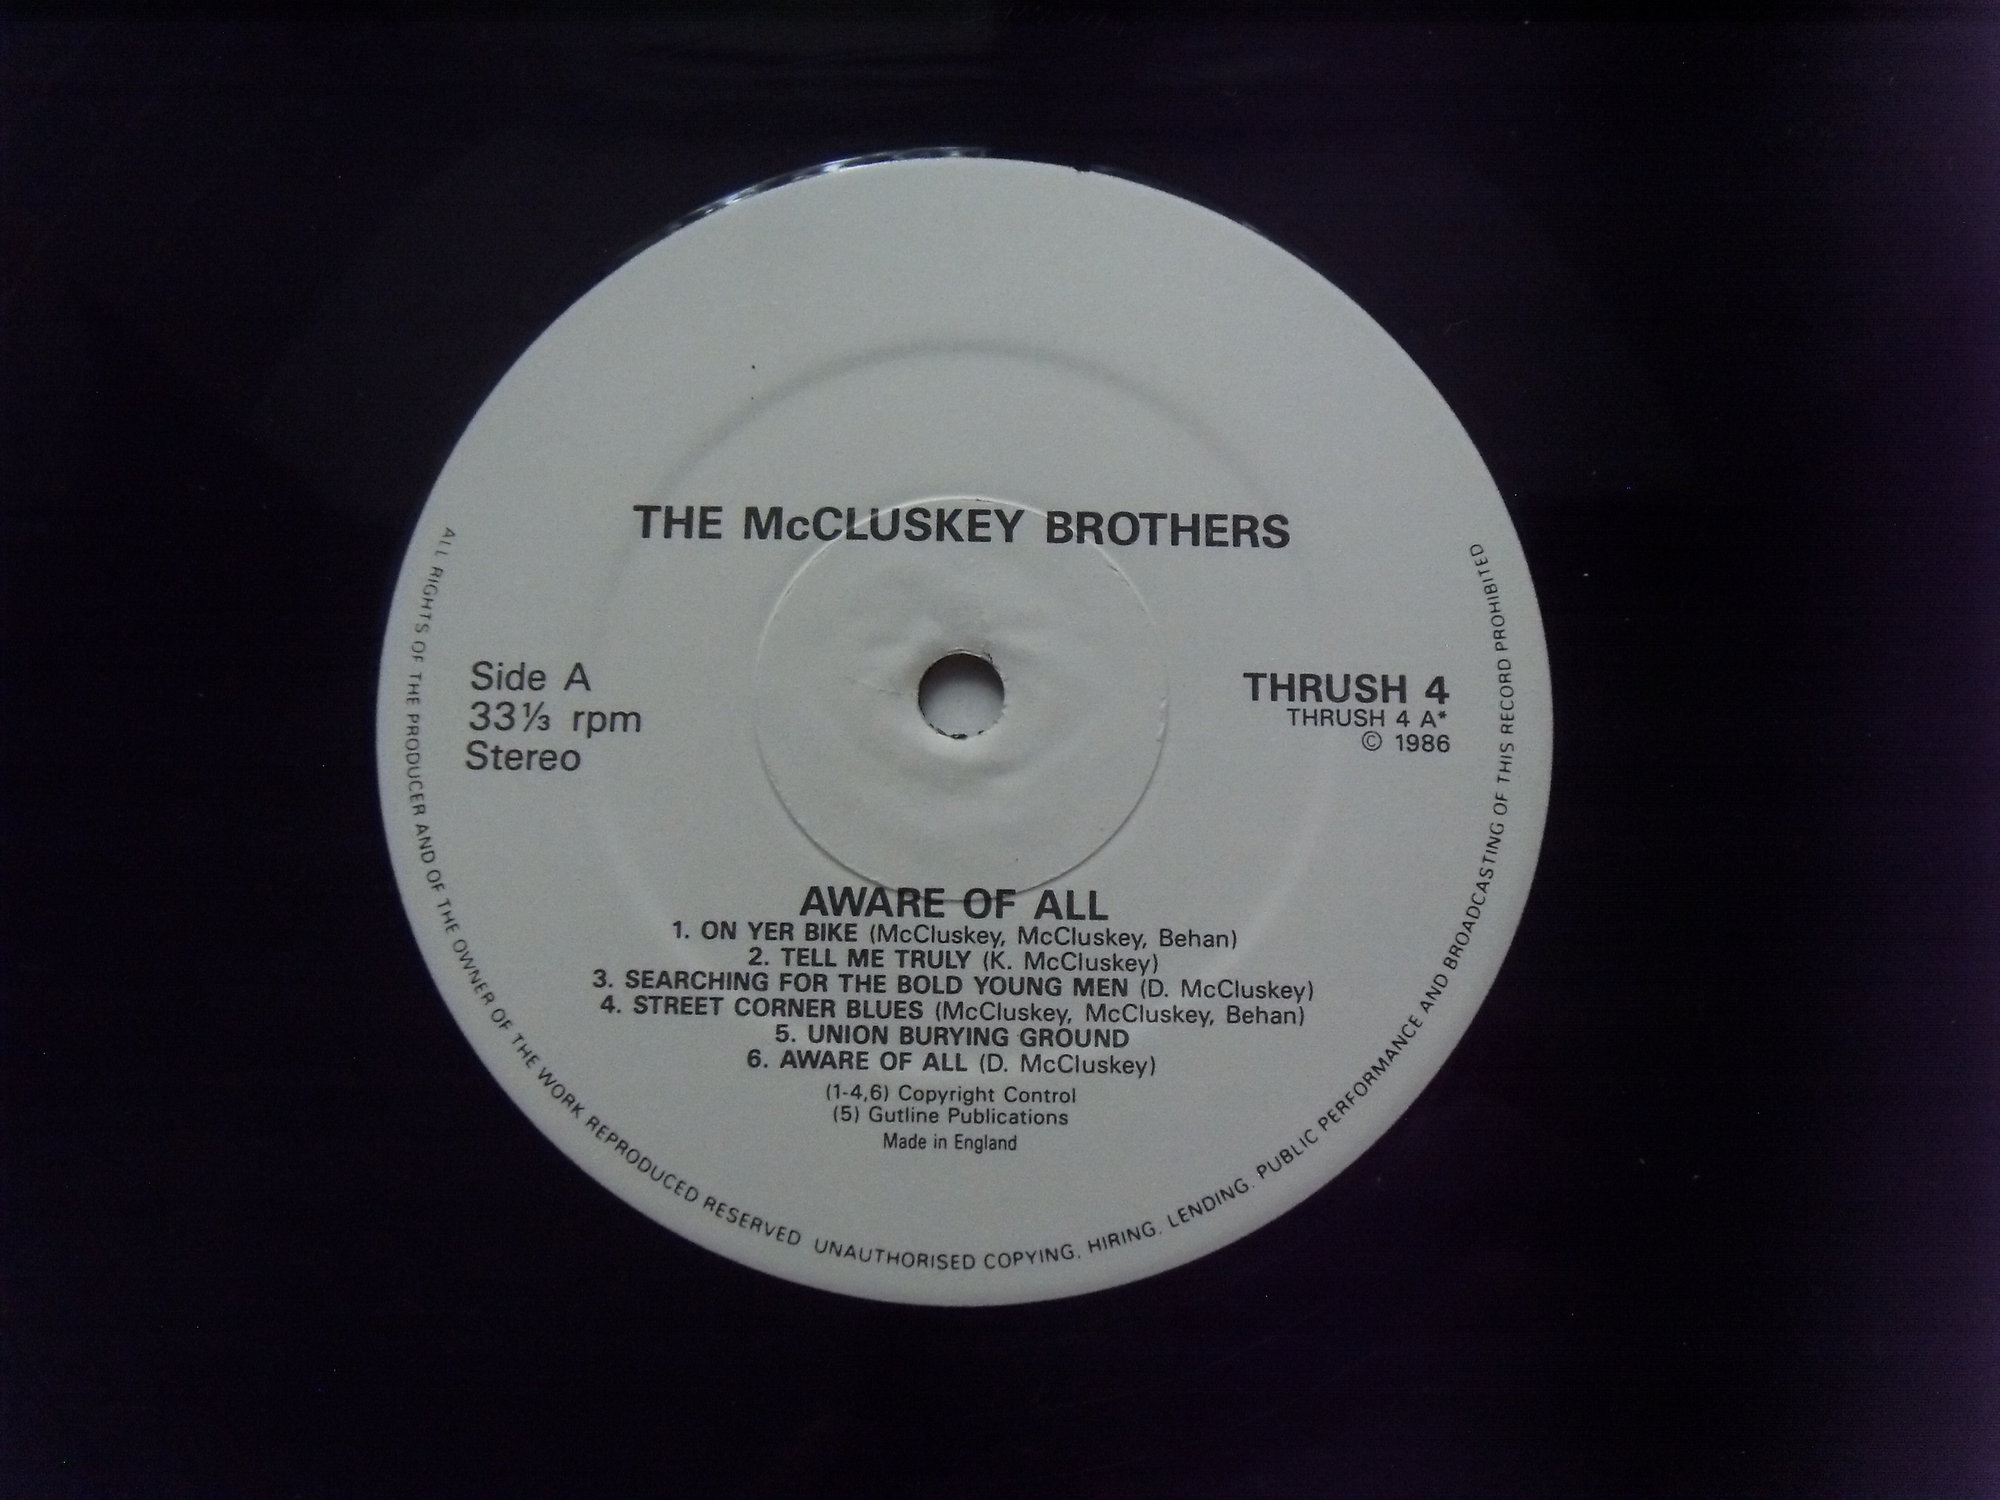 THE MCCLUSKEY BROTHERS Aware of All 3